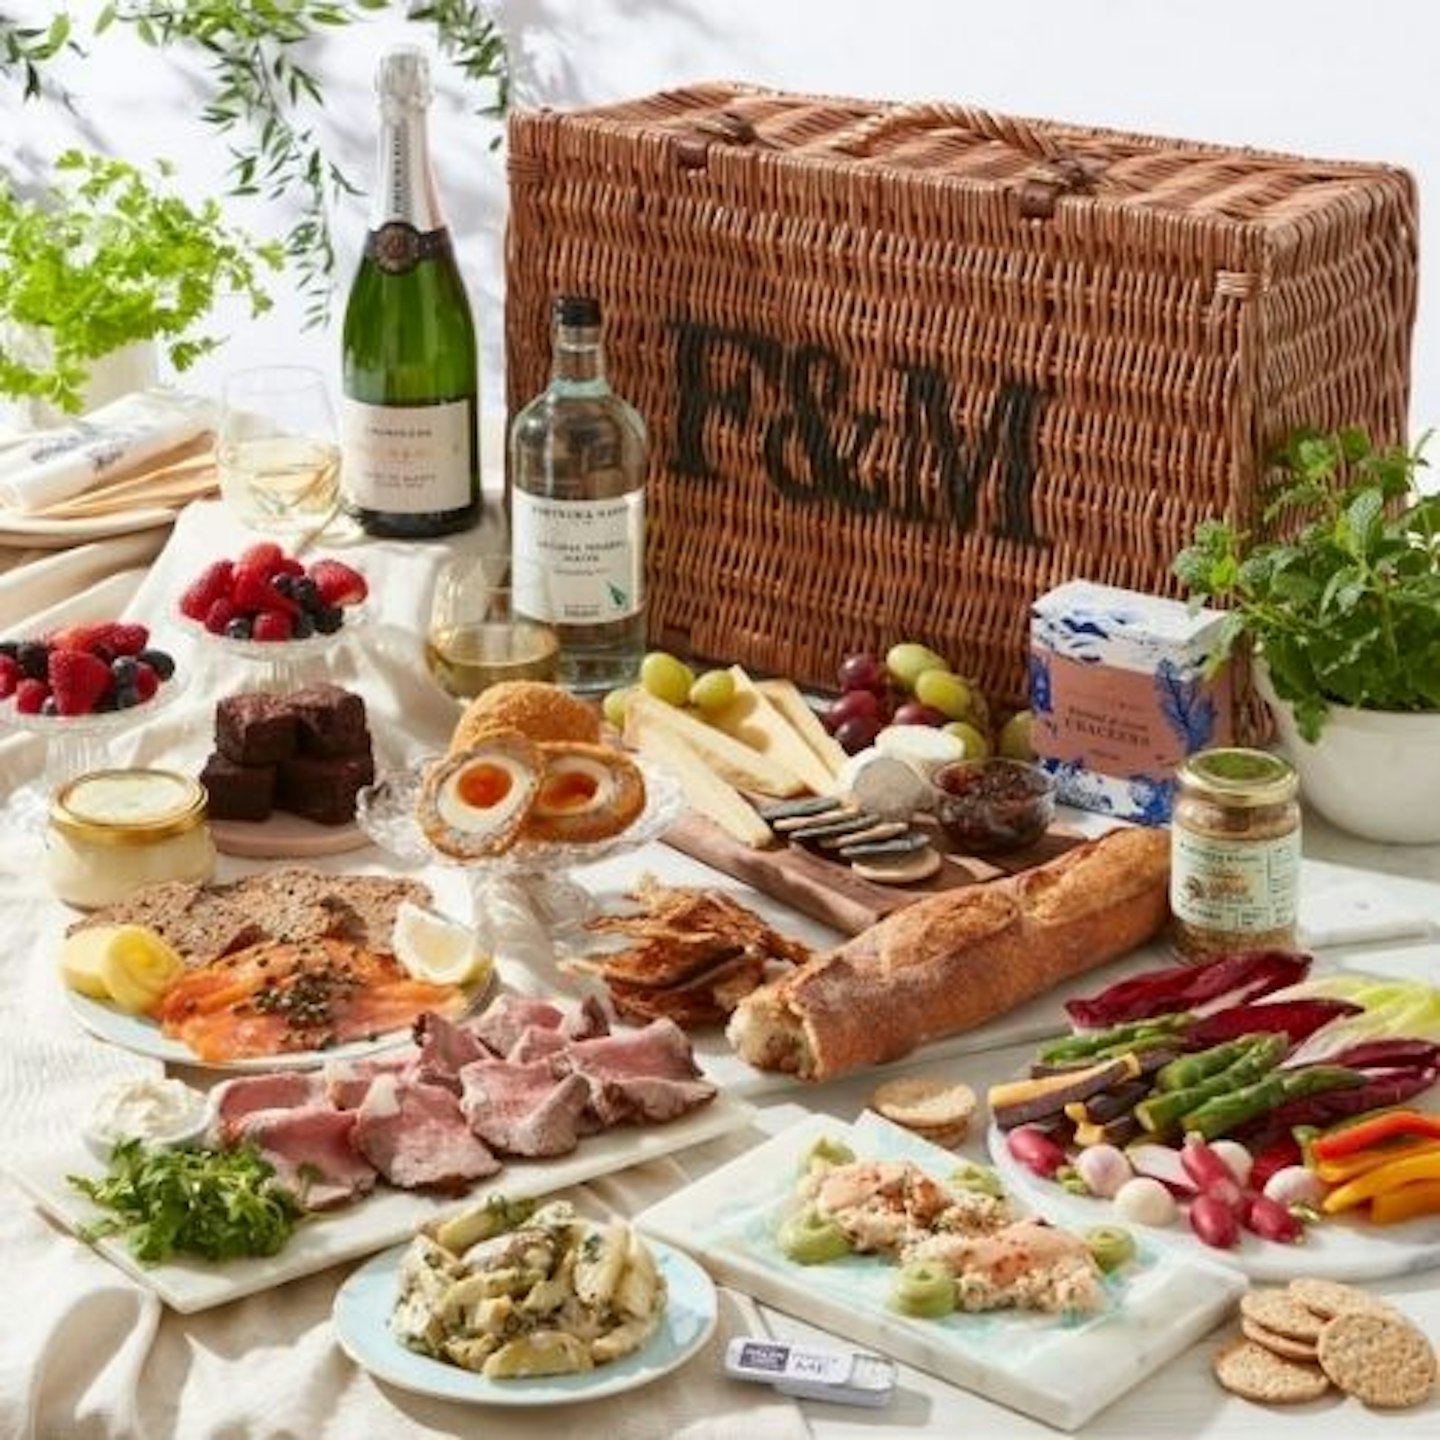 The Luxury Picnic Hamper for Two